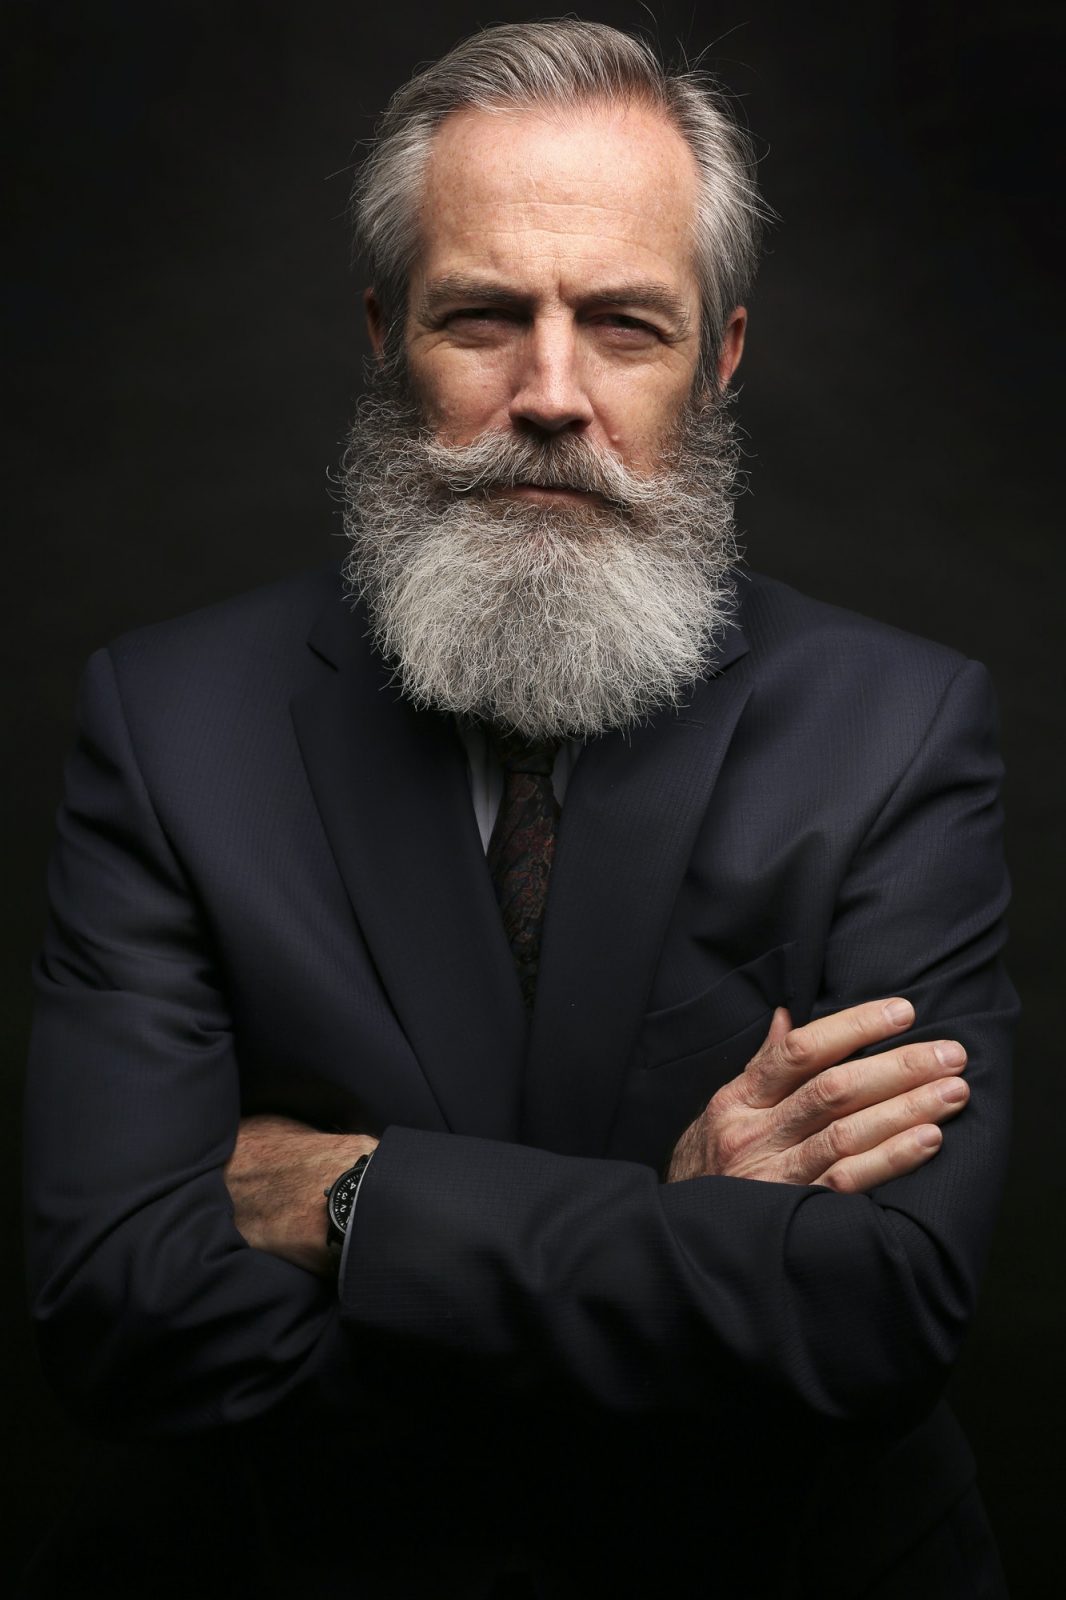 mature male model wearing suit with grey hairstyle and beard